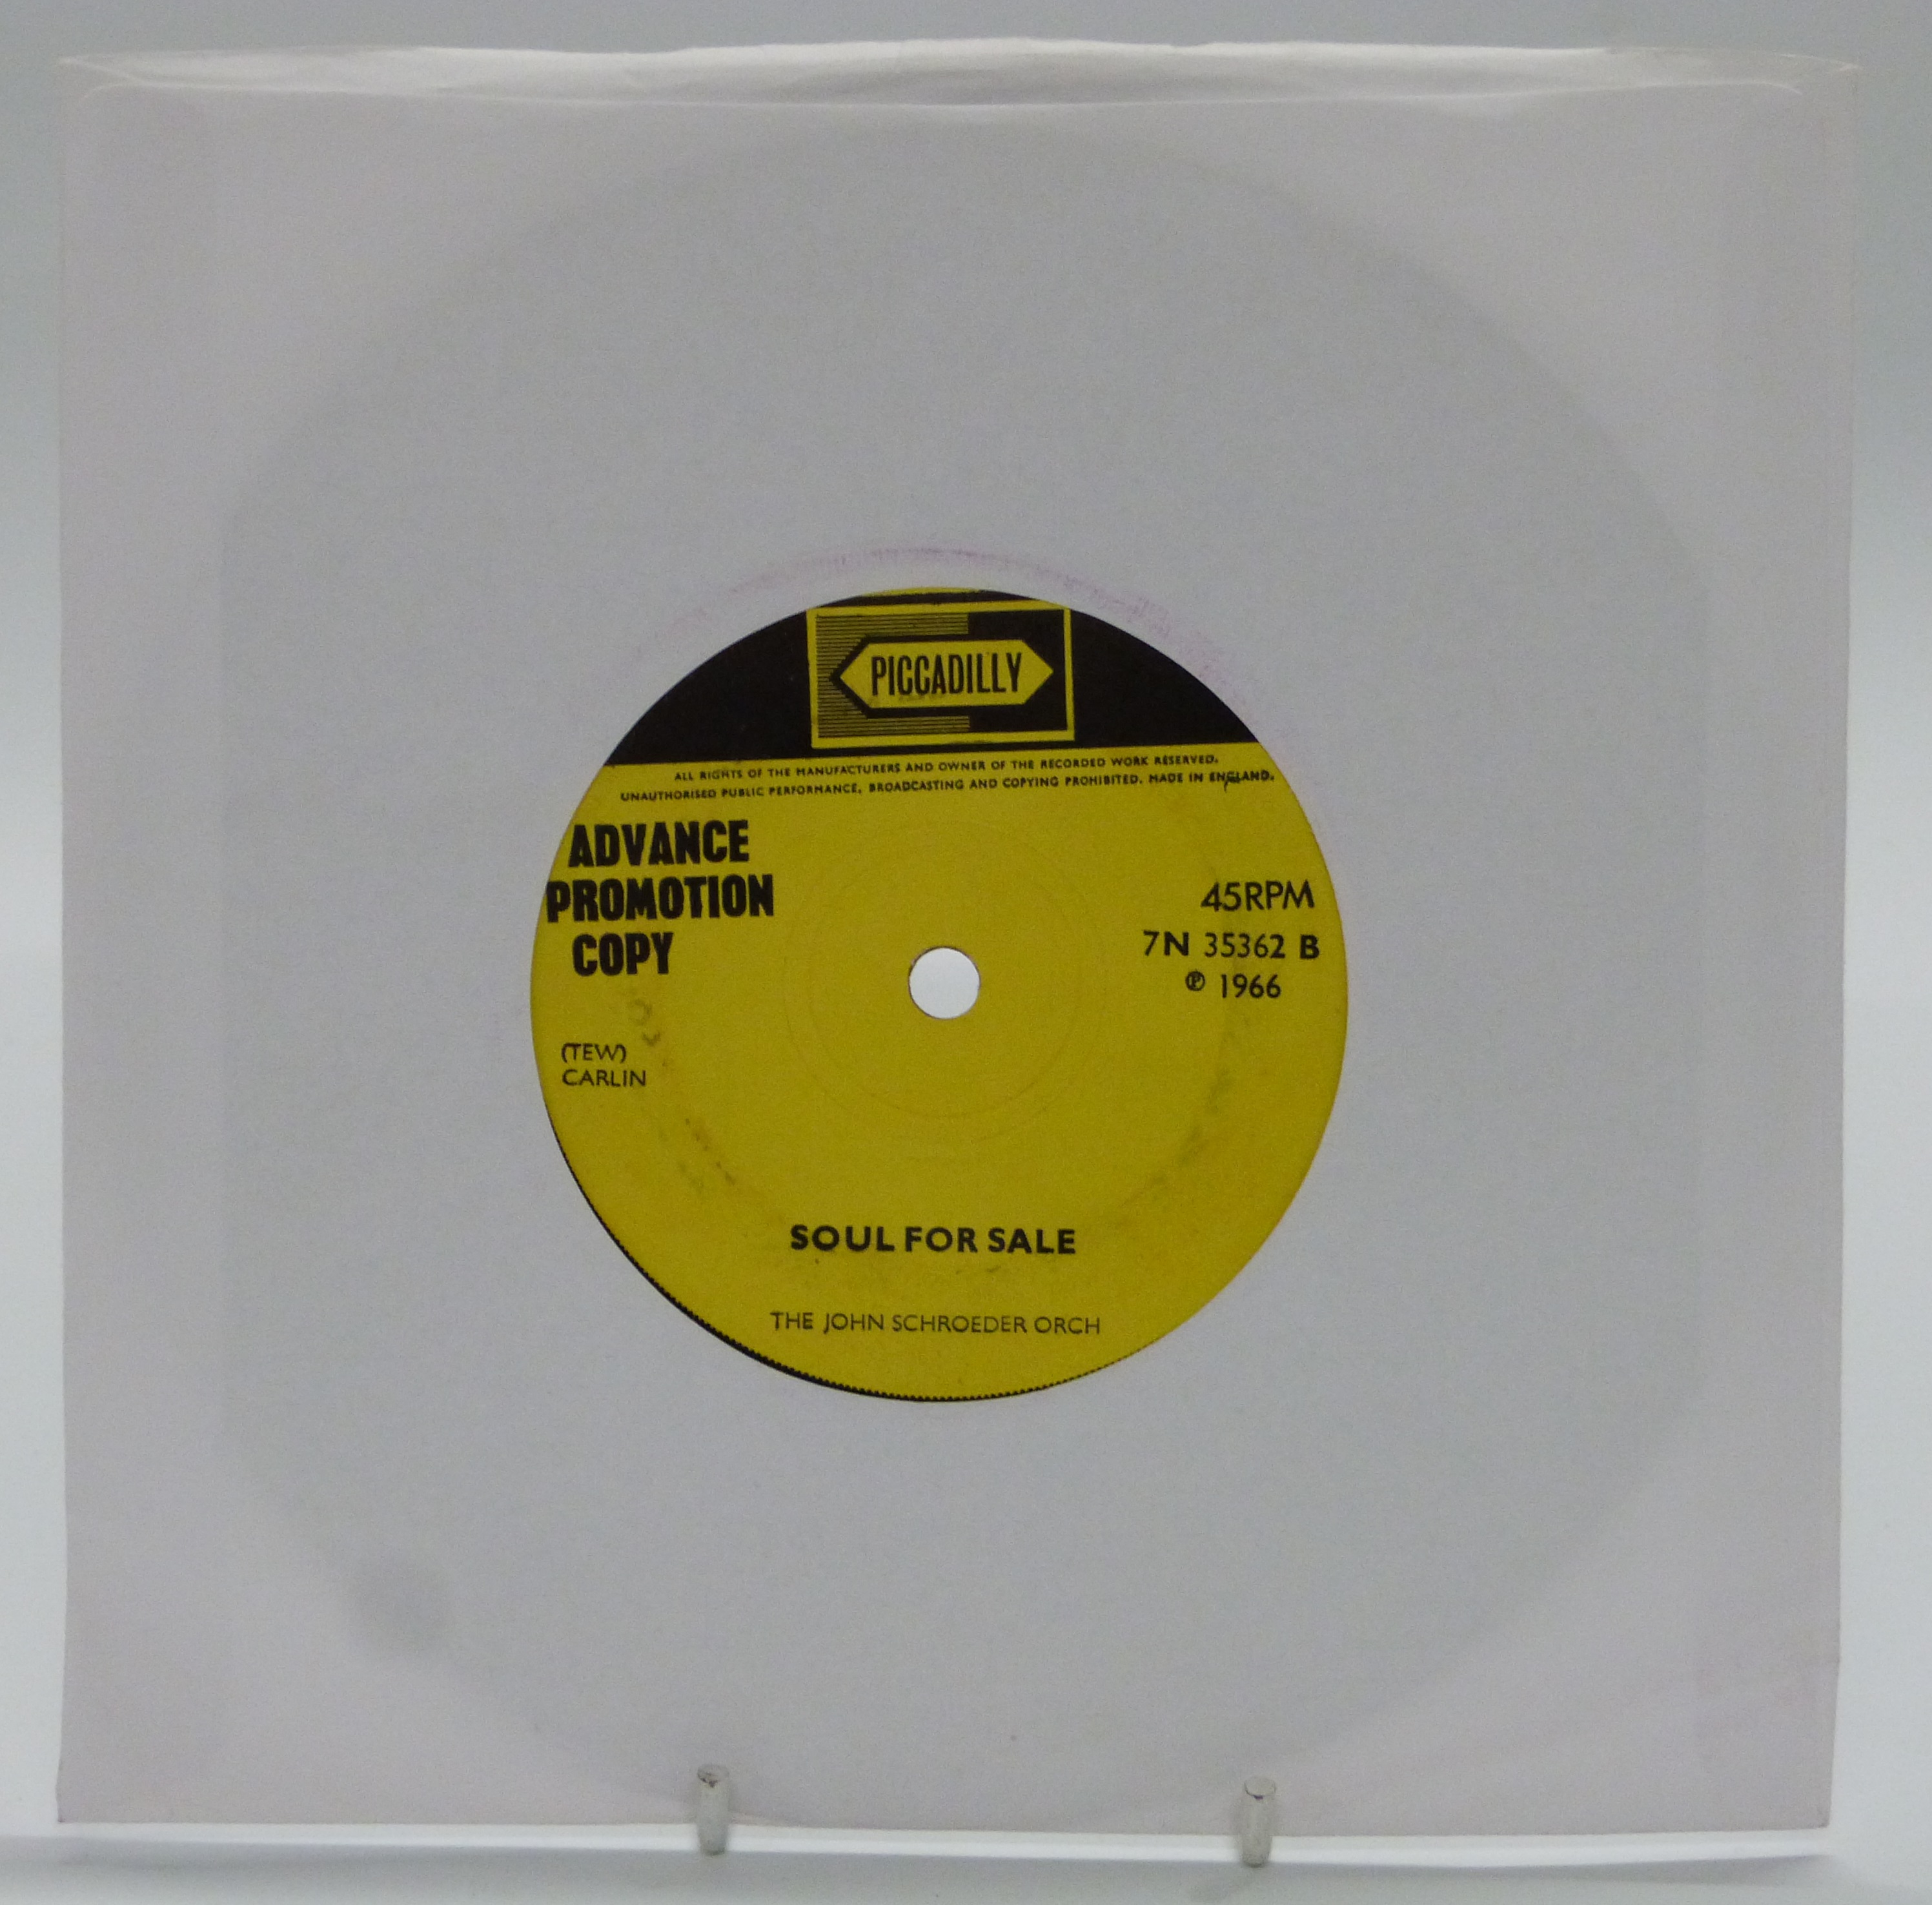 The John Schroeder Orchestra -You've Lost That Lovin' Feeling (7n 35362) demo, appears EX - Image 2 of 2